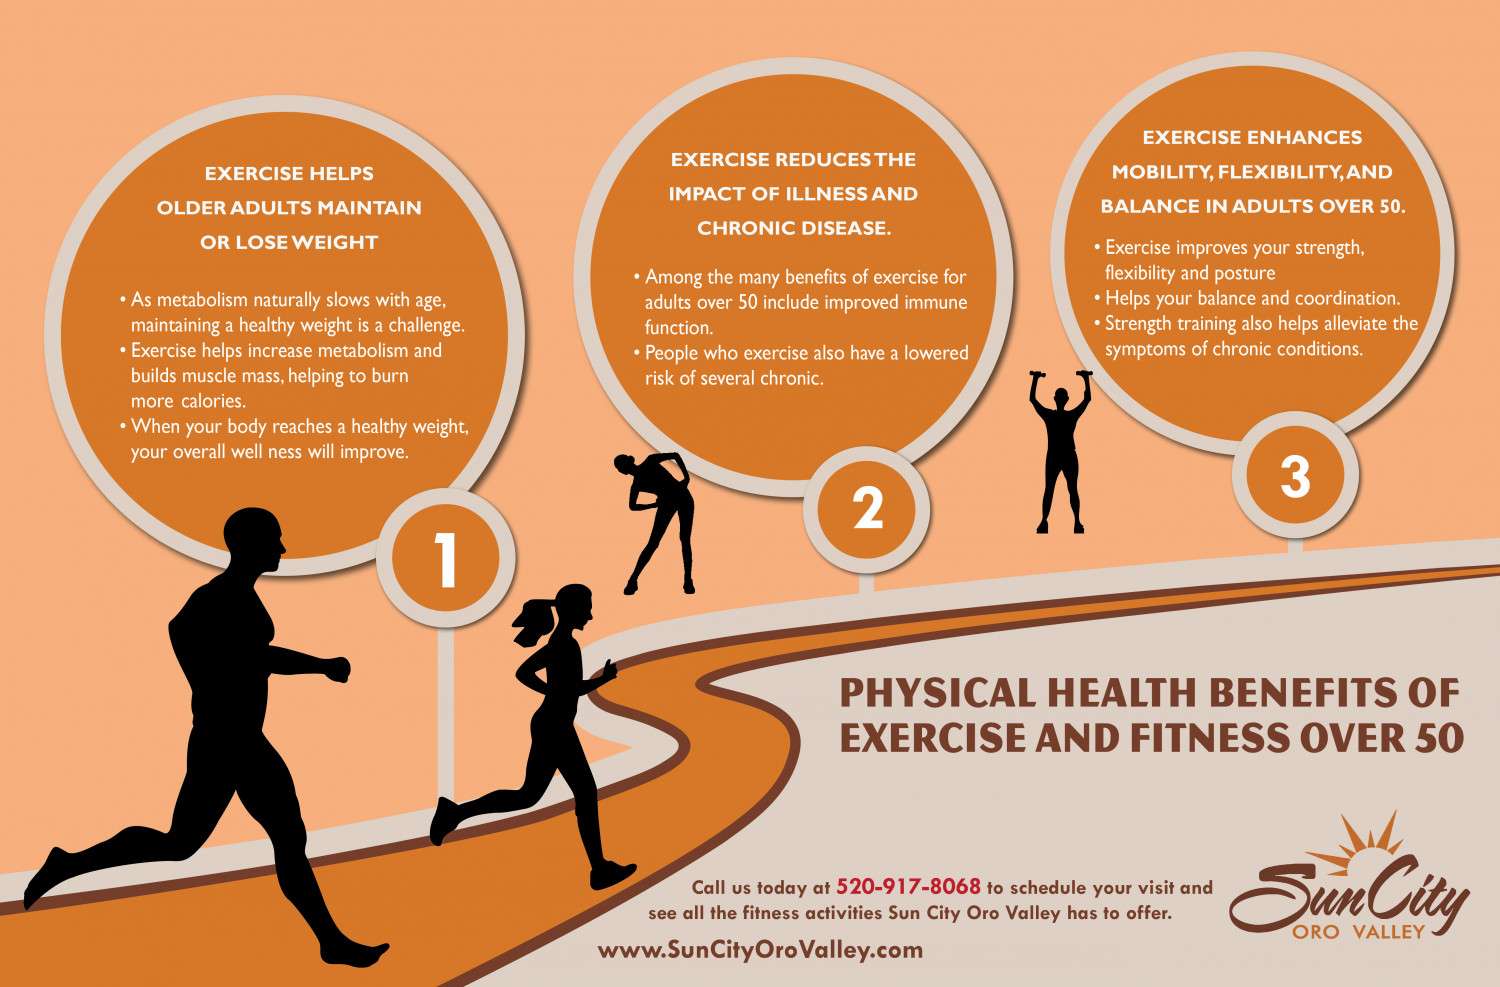 Physical Health Benefits of Exercise and Fitness Over 50